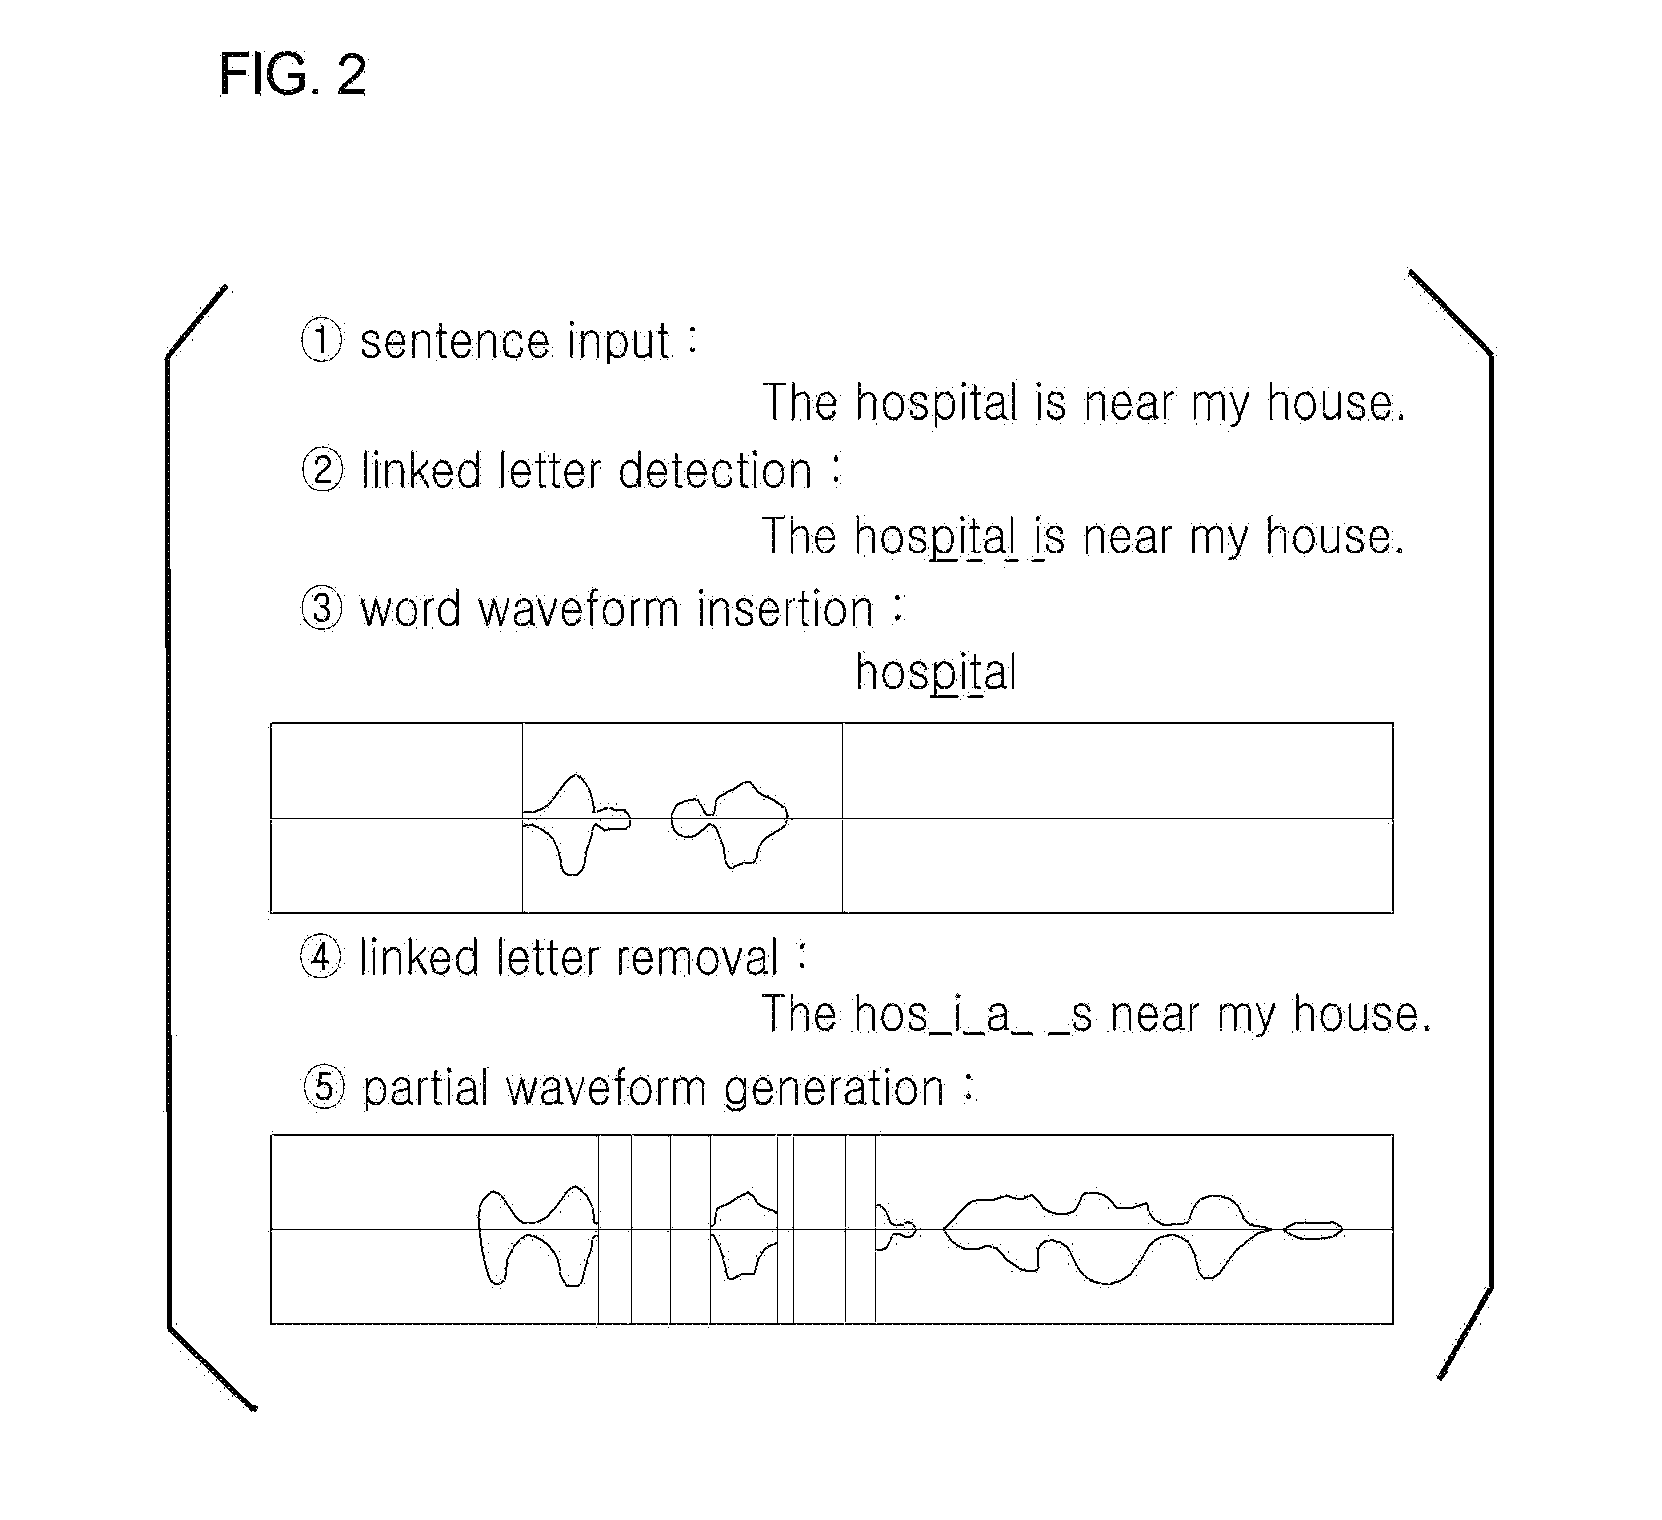 Foreign language learning apparatus and method for correcting pronunciation through sentence input